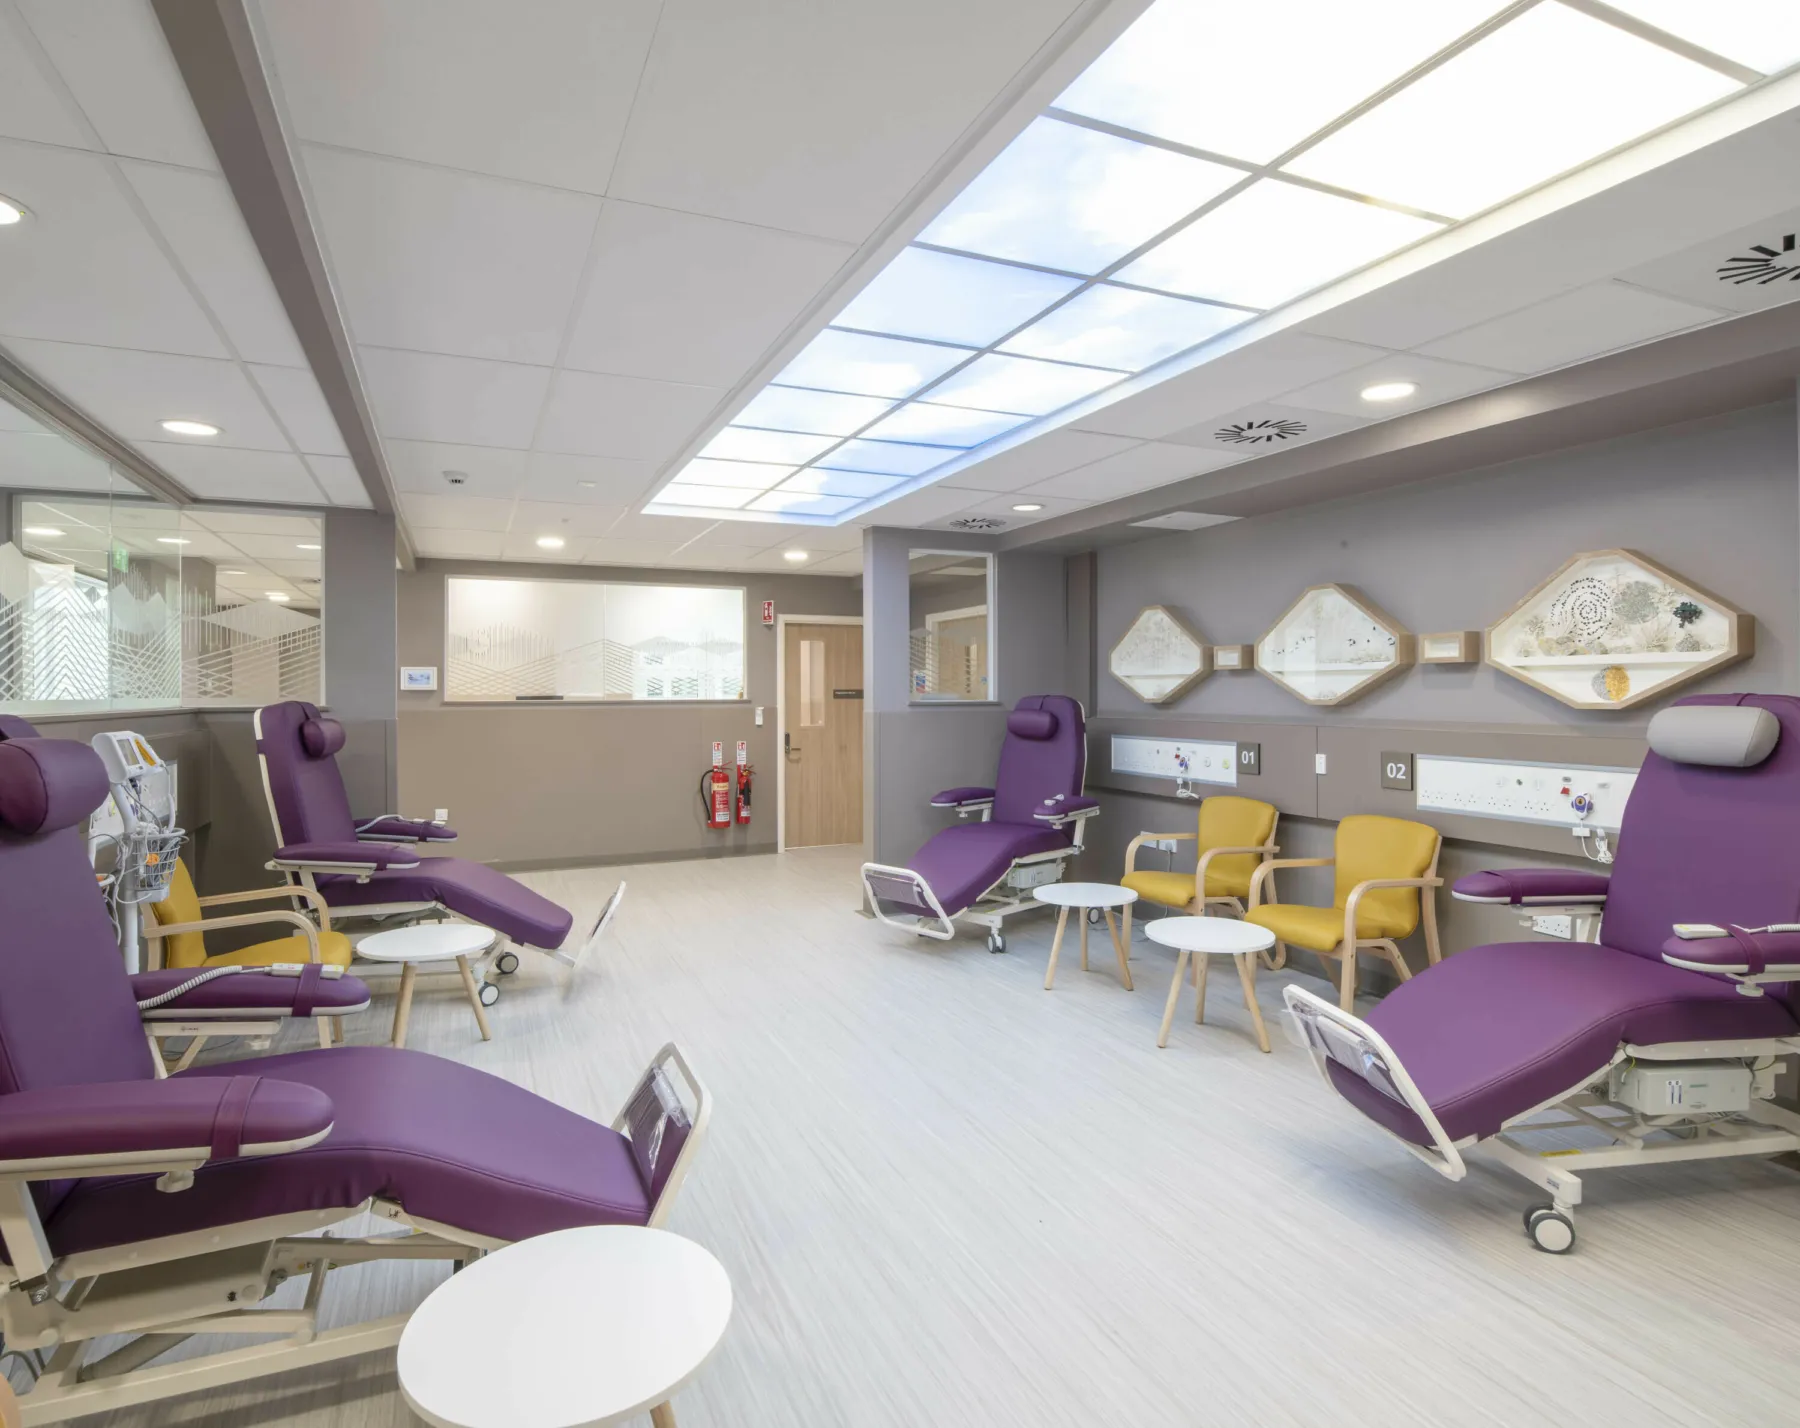 A treatment ward in the Haematology Centre at the Western General Hospital, Edinburgh. Chairs for patients and visitors are arranged around the room. Bespoke artwork is on the walls and a bespoke installation provides the illusion of a skylight above.